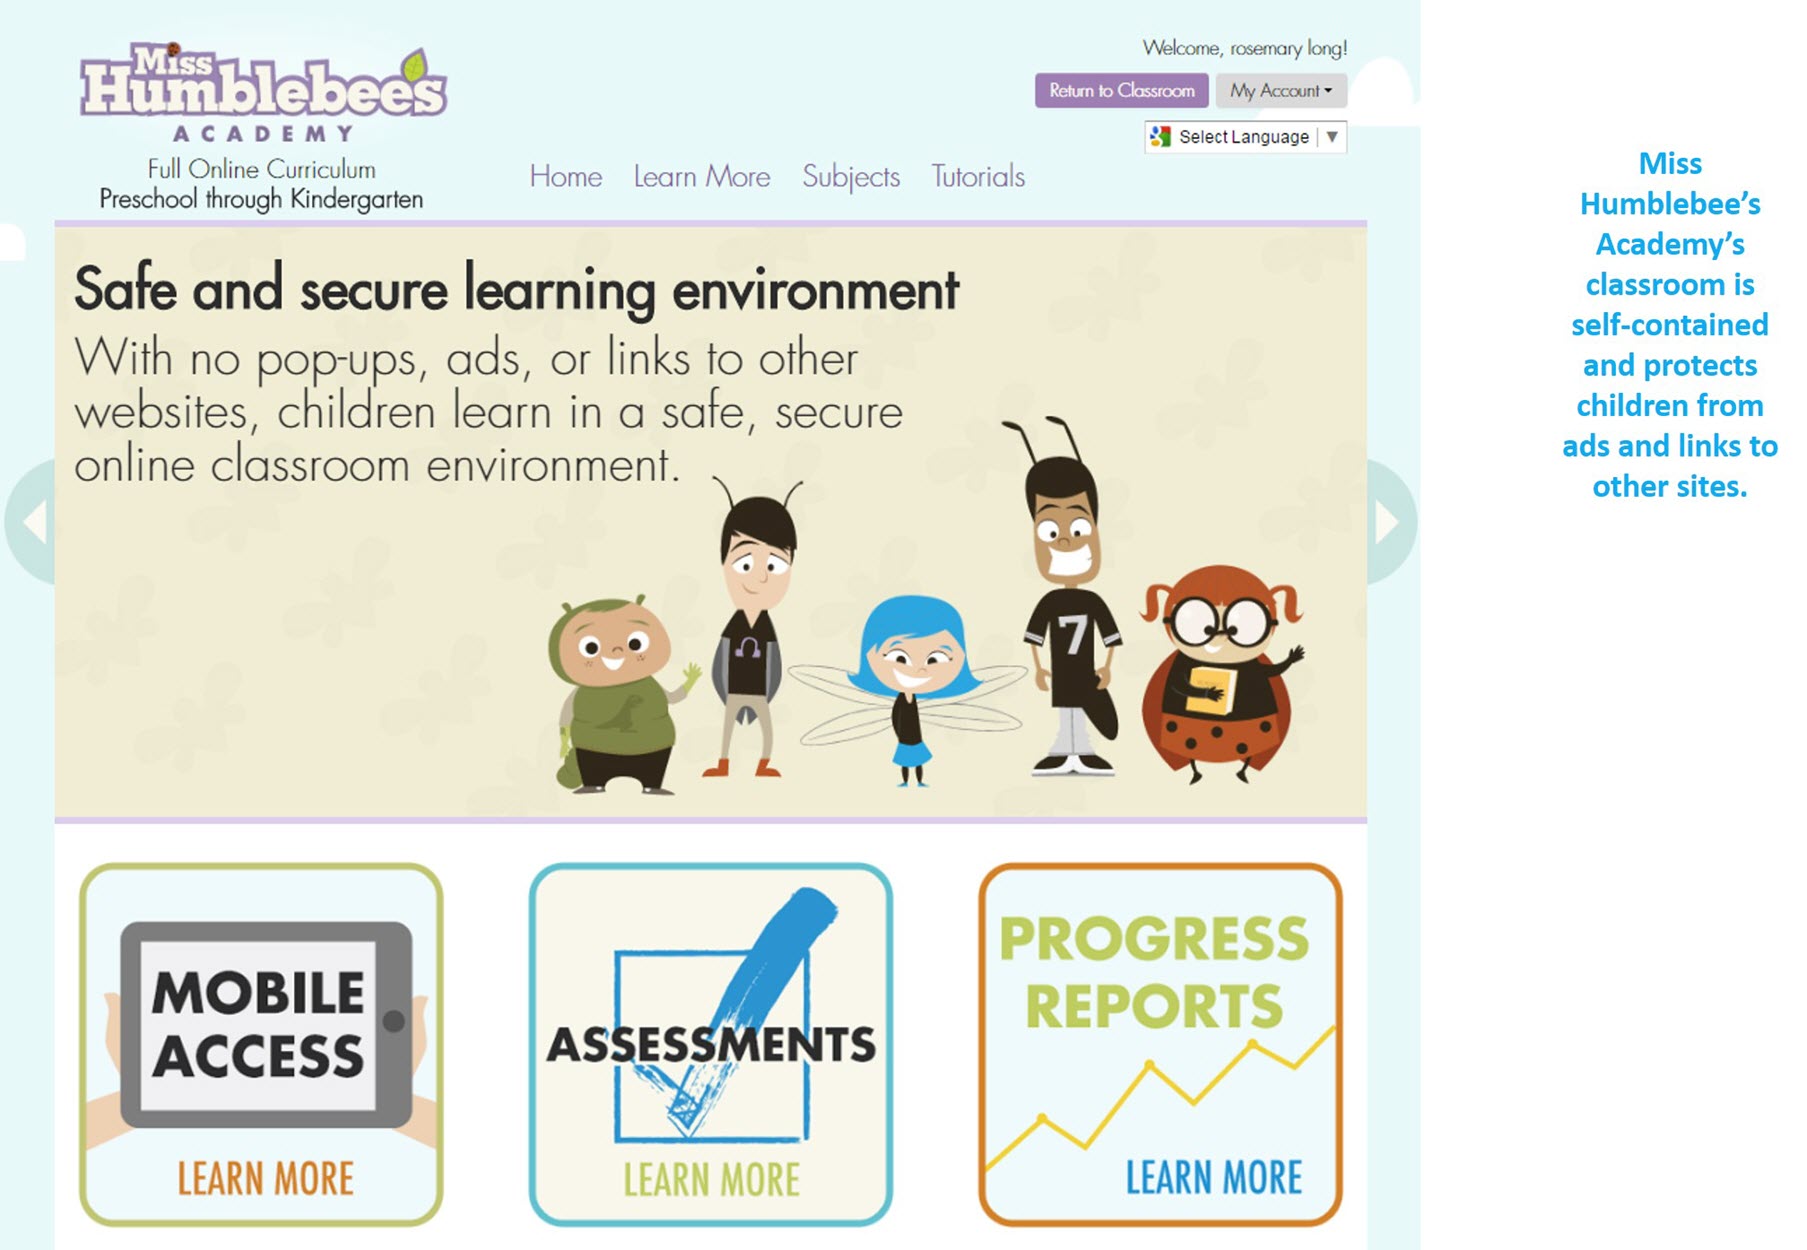 Miss Humblebee’s Academy’s classroom is self-contained and protects children from ads and links to other sites.